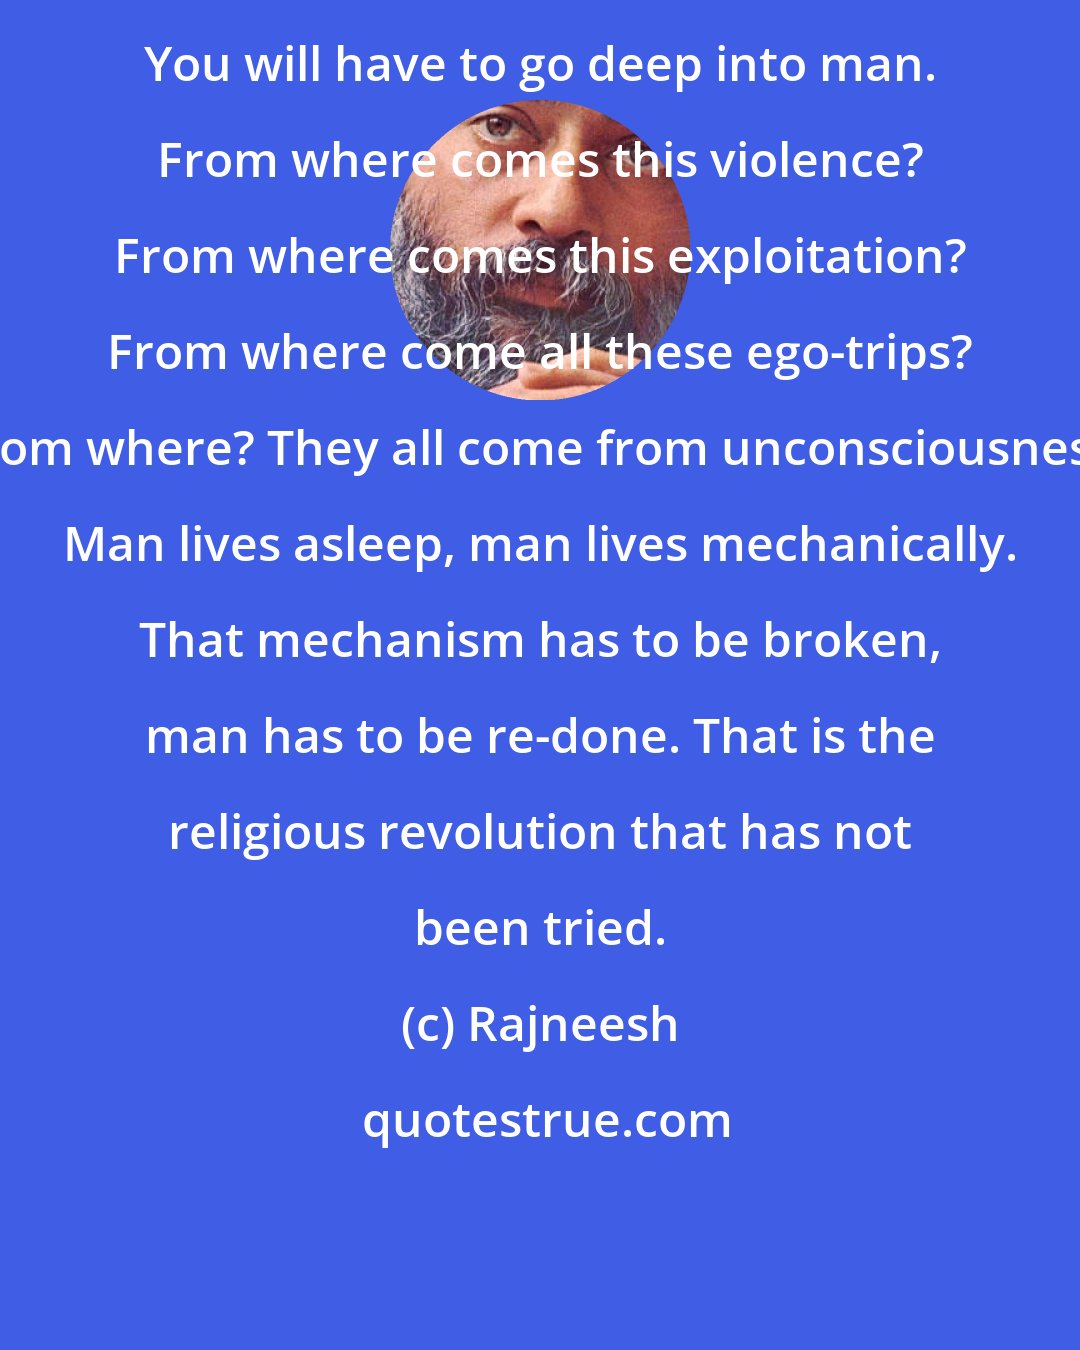 Rajneesh: You will have to go deep into man. From where comes this violence? From where comes this exploitation? From where come all these ego-trips? From where? They all come from unconsciousness. Man lives asleep, man lives mechanically. That mechanism has to be broken, man has to be re-done. That is the religious revolution that has not been tried.